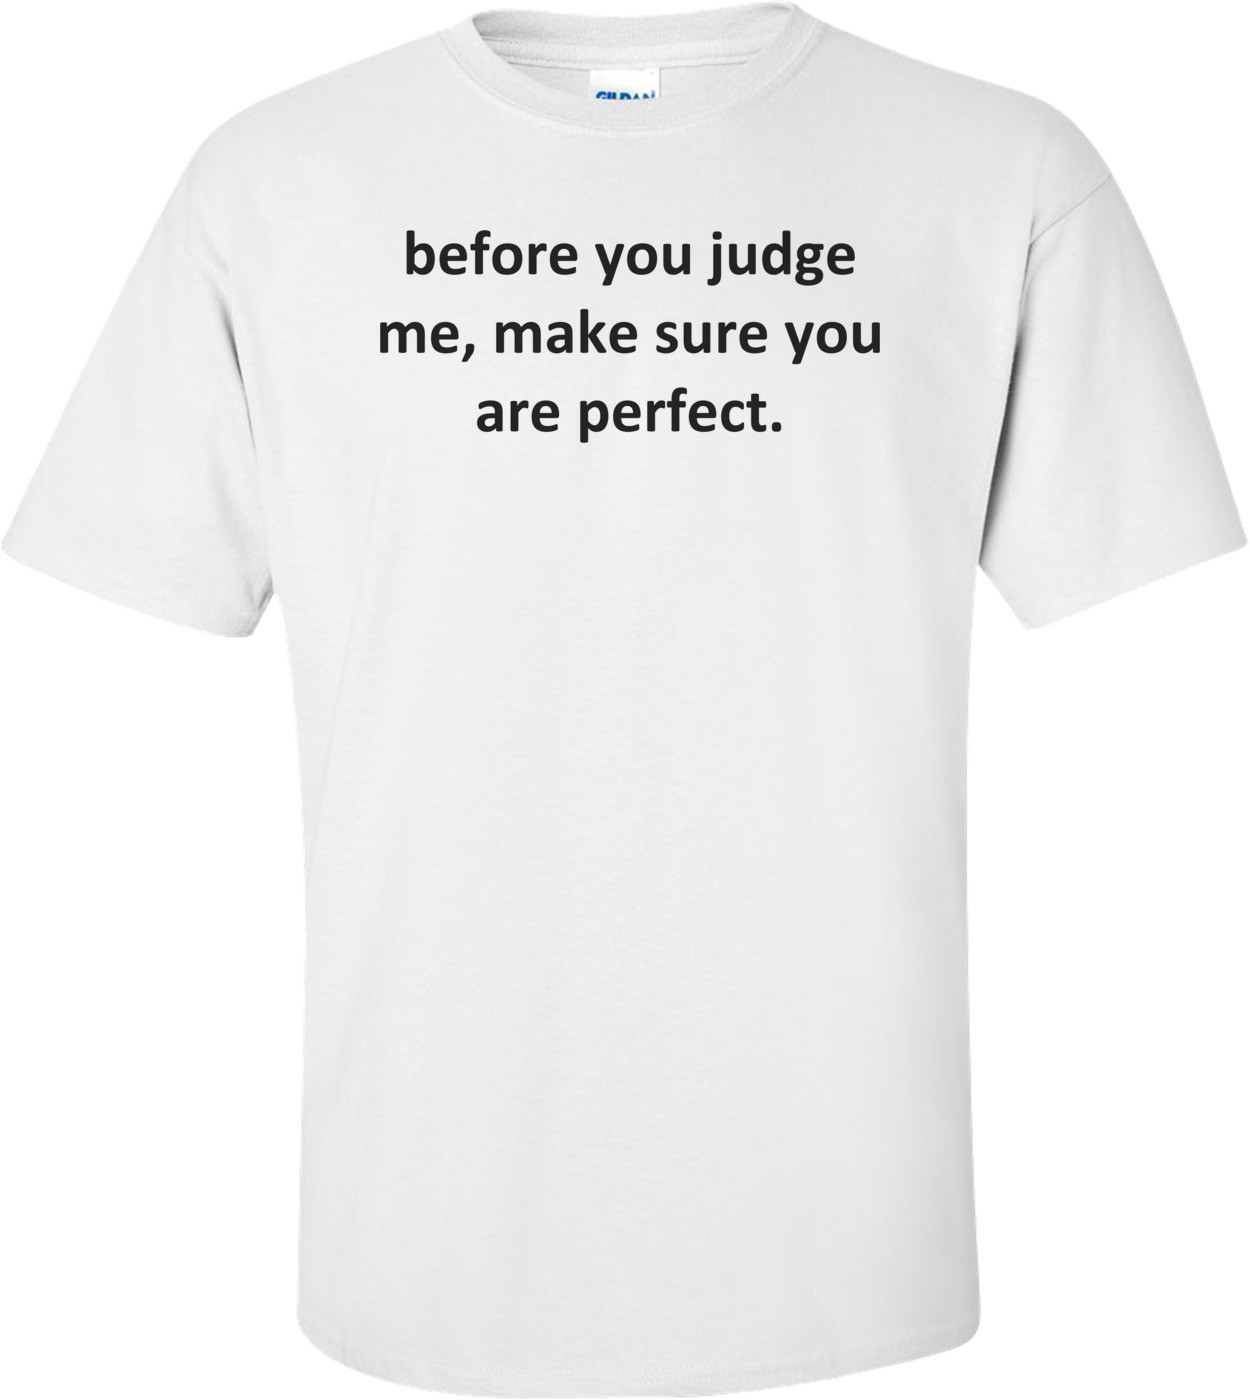 before you judge me, make sure you are perfect.